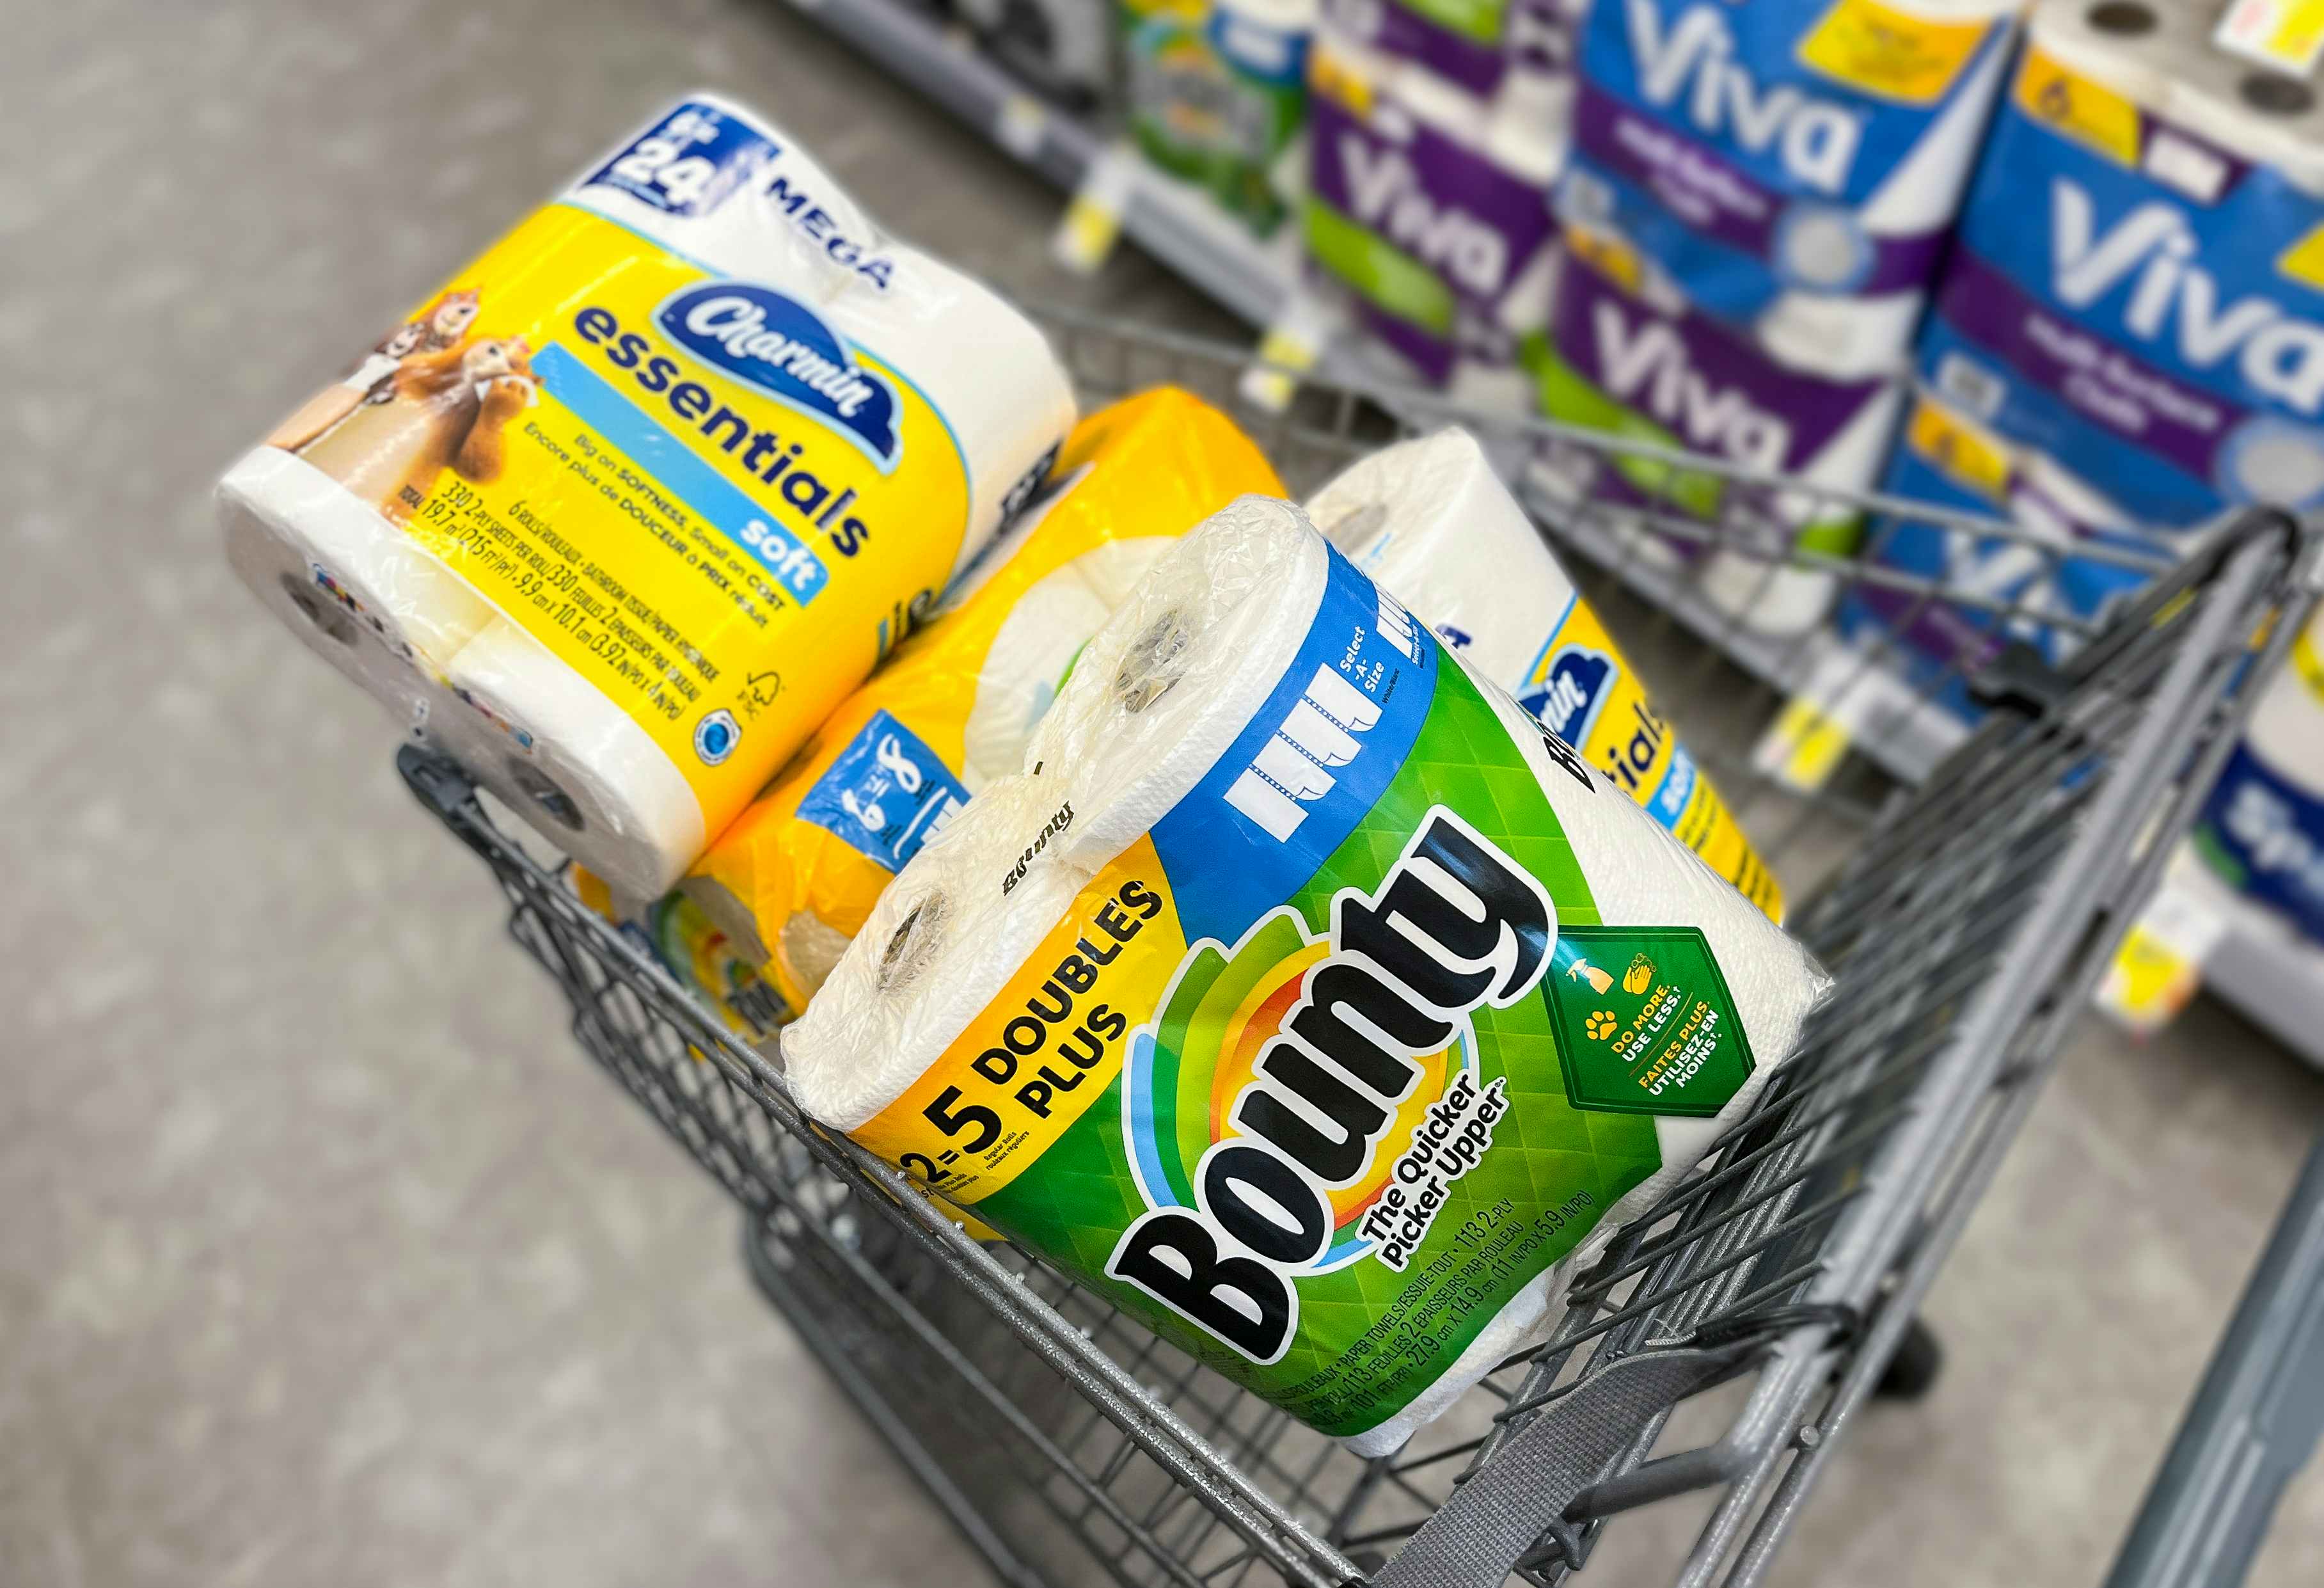 charmin toilet paper and bounty paper towel